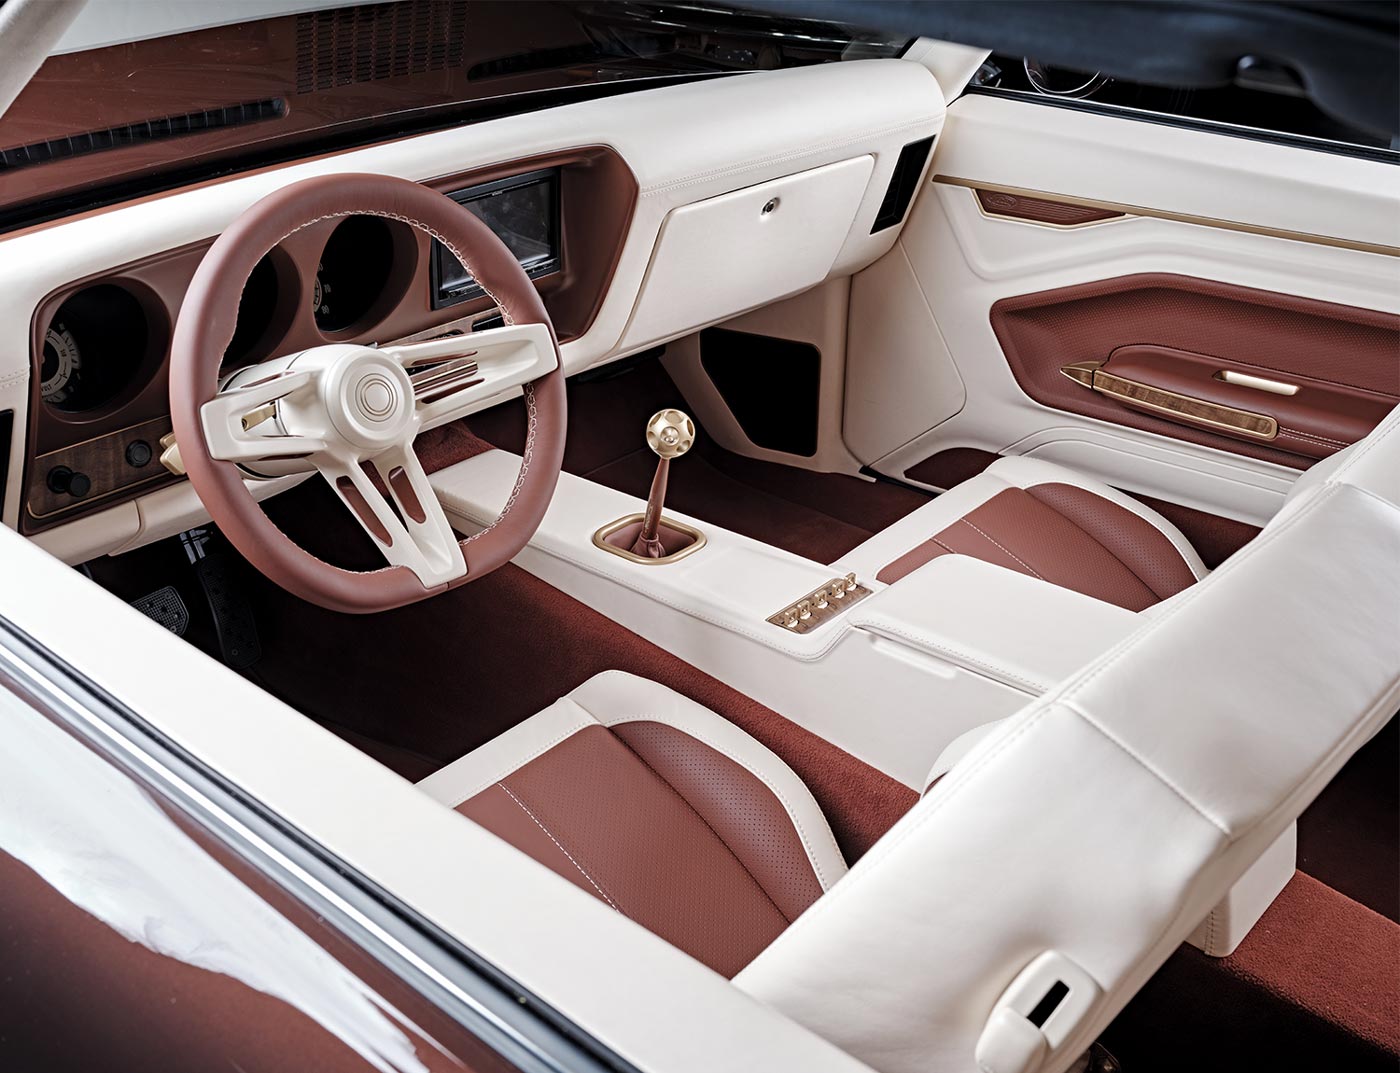 view inside the ’69 GTO driver side window with a focus on the front seating, featuring brown- and cream-colored leather stitched bucket seats